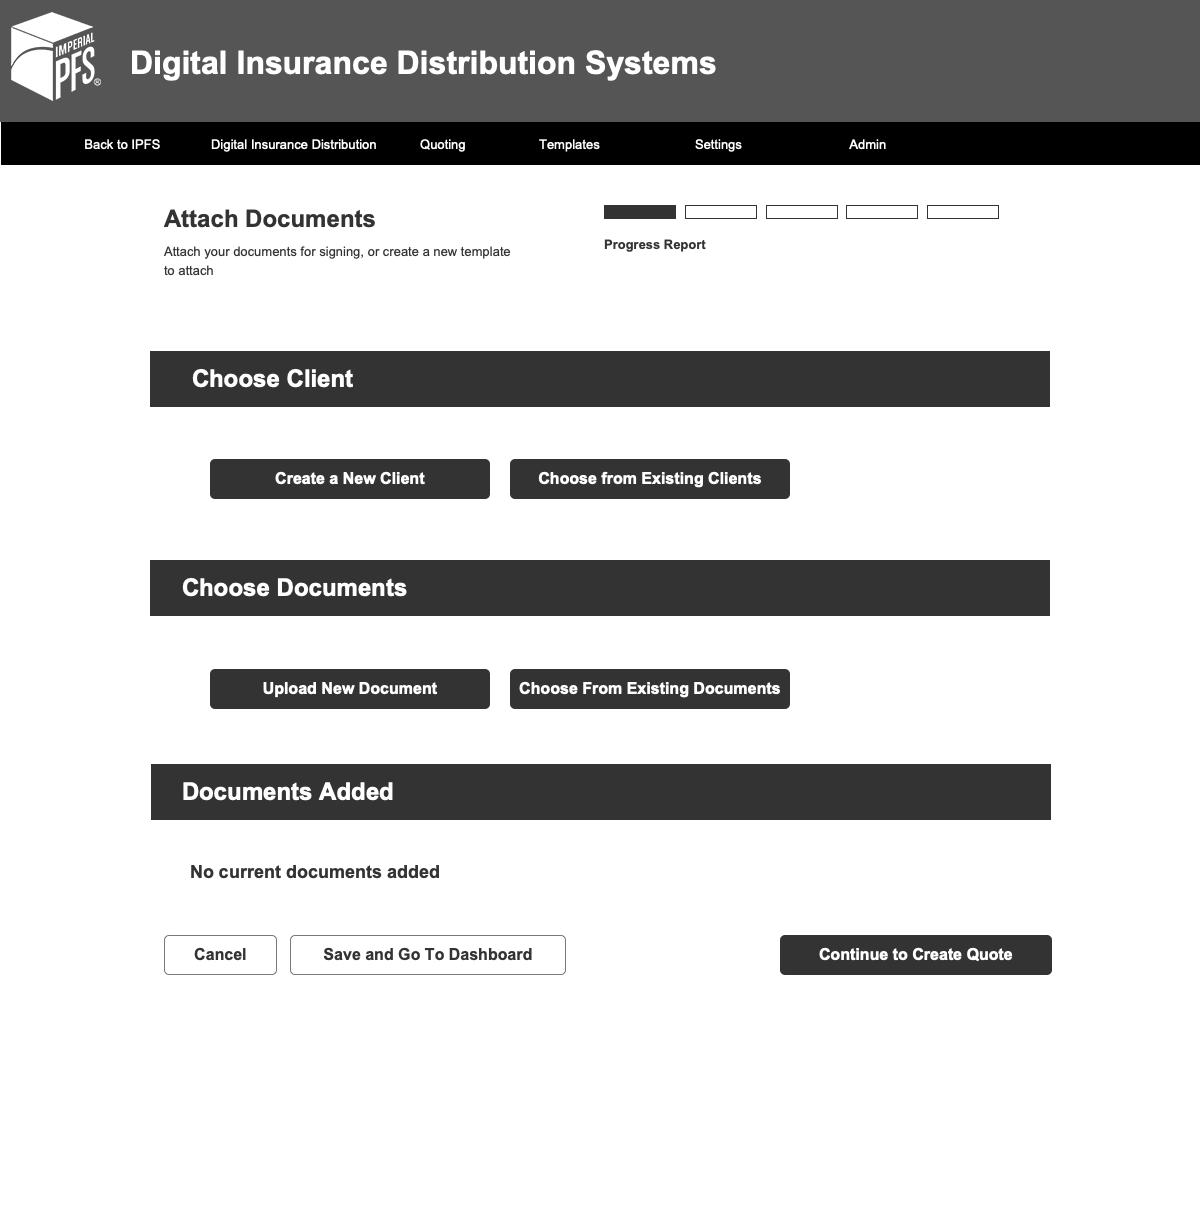 DIDS System Screenshot- Includes User Options to Choose Client, Choose Documents, Add Documents